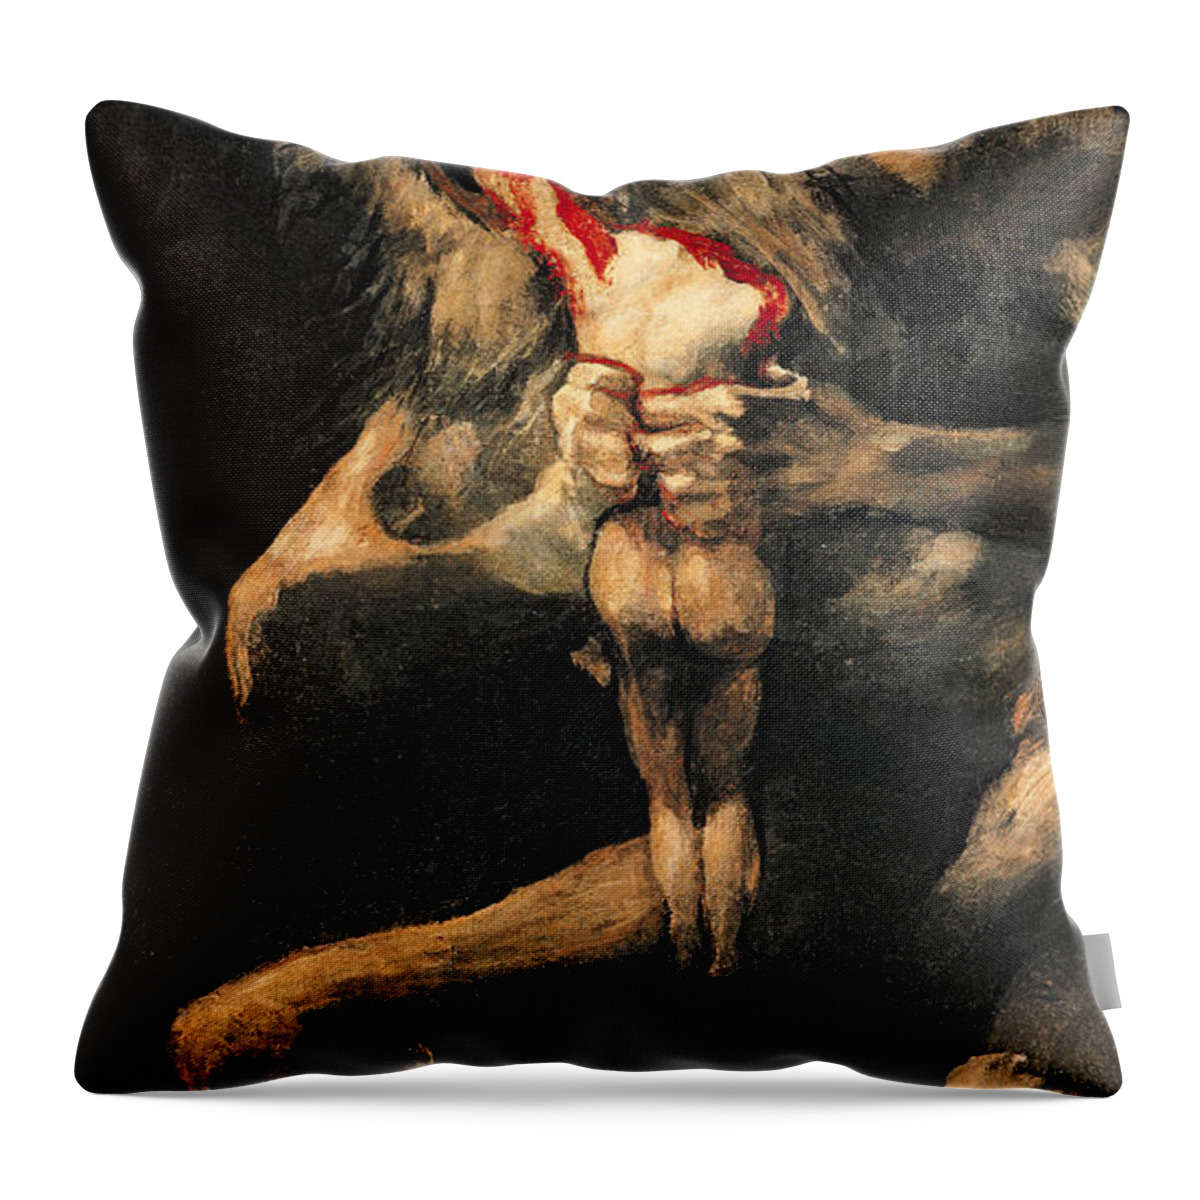 Saturn Throw Pillow featuring the painting Saturn Devouring one of his Children by Goya